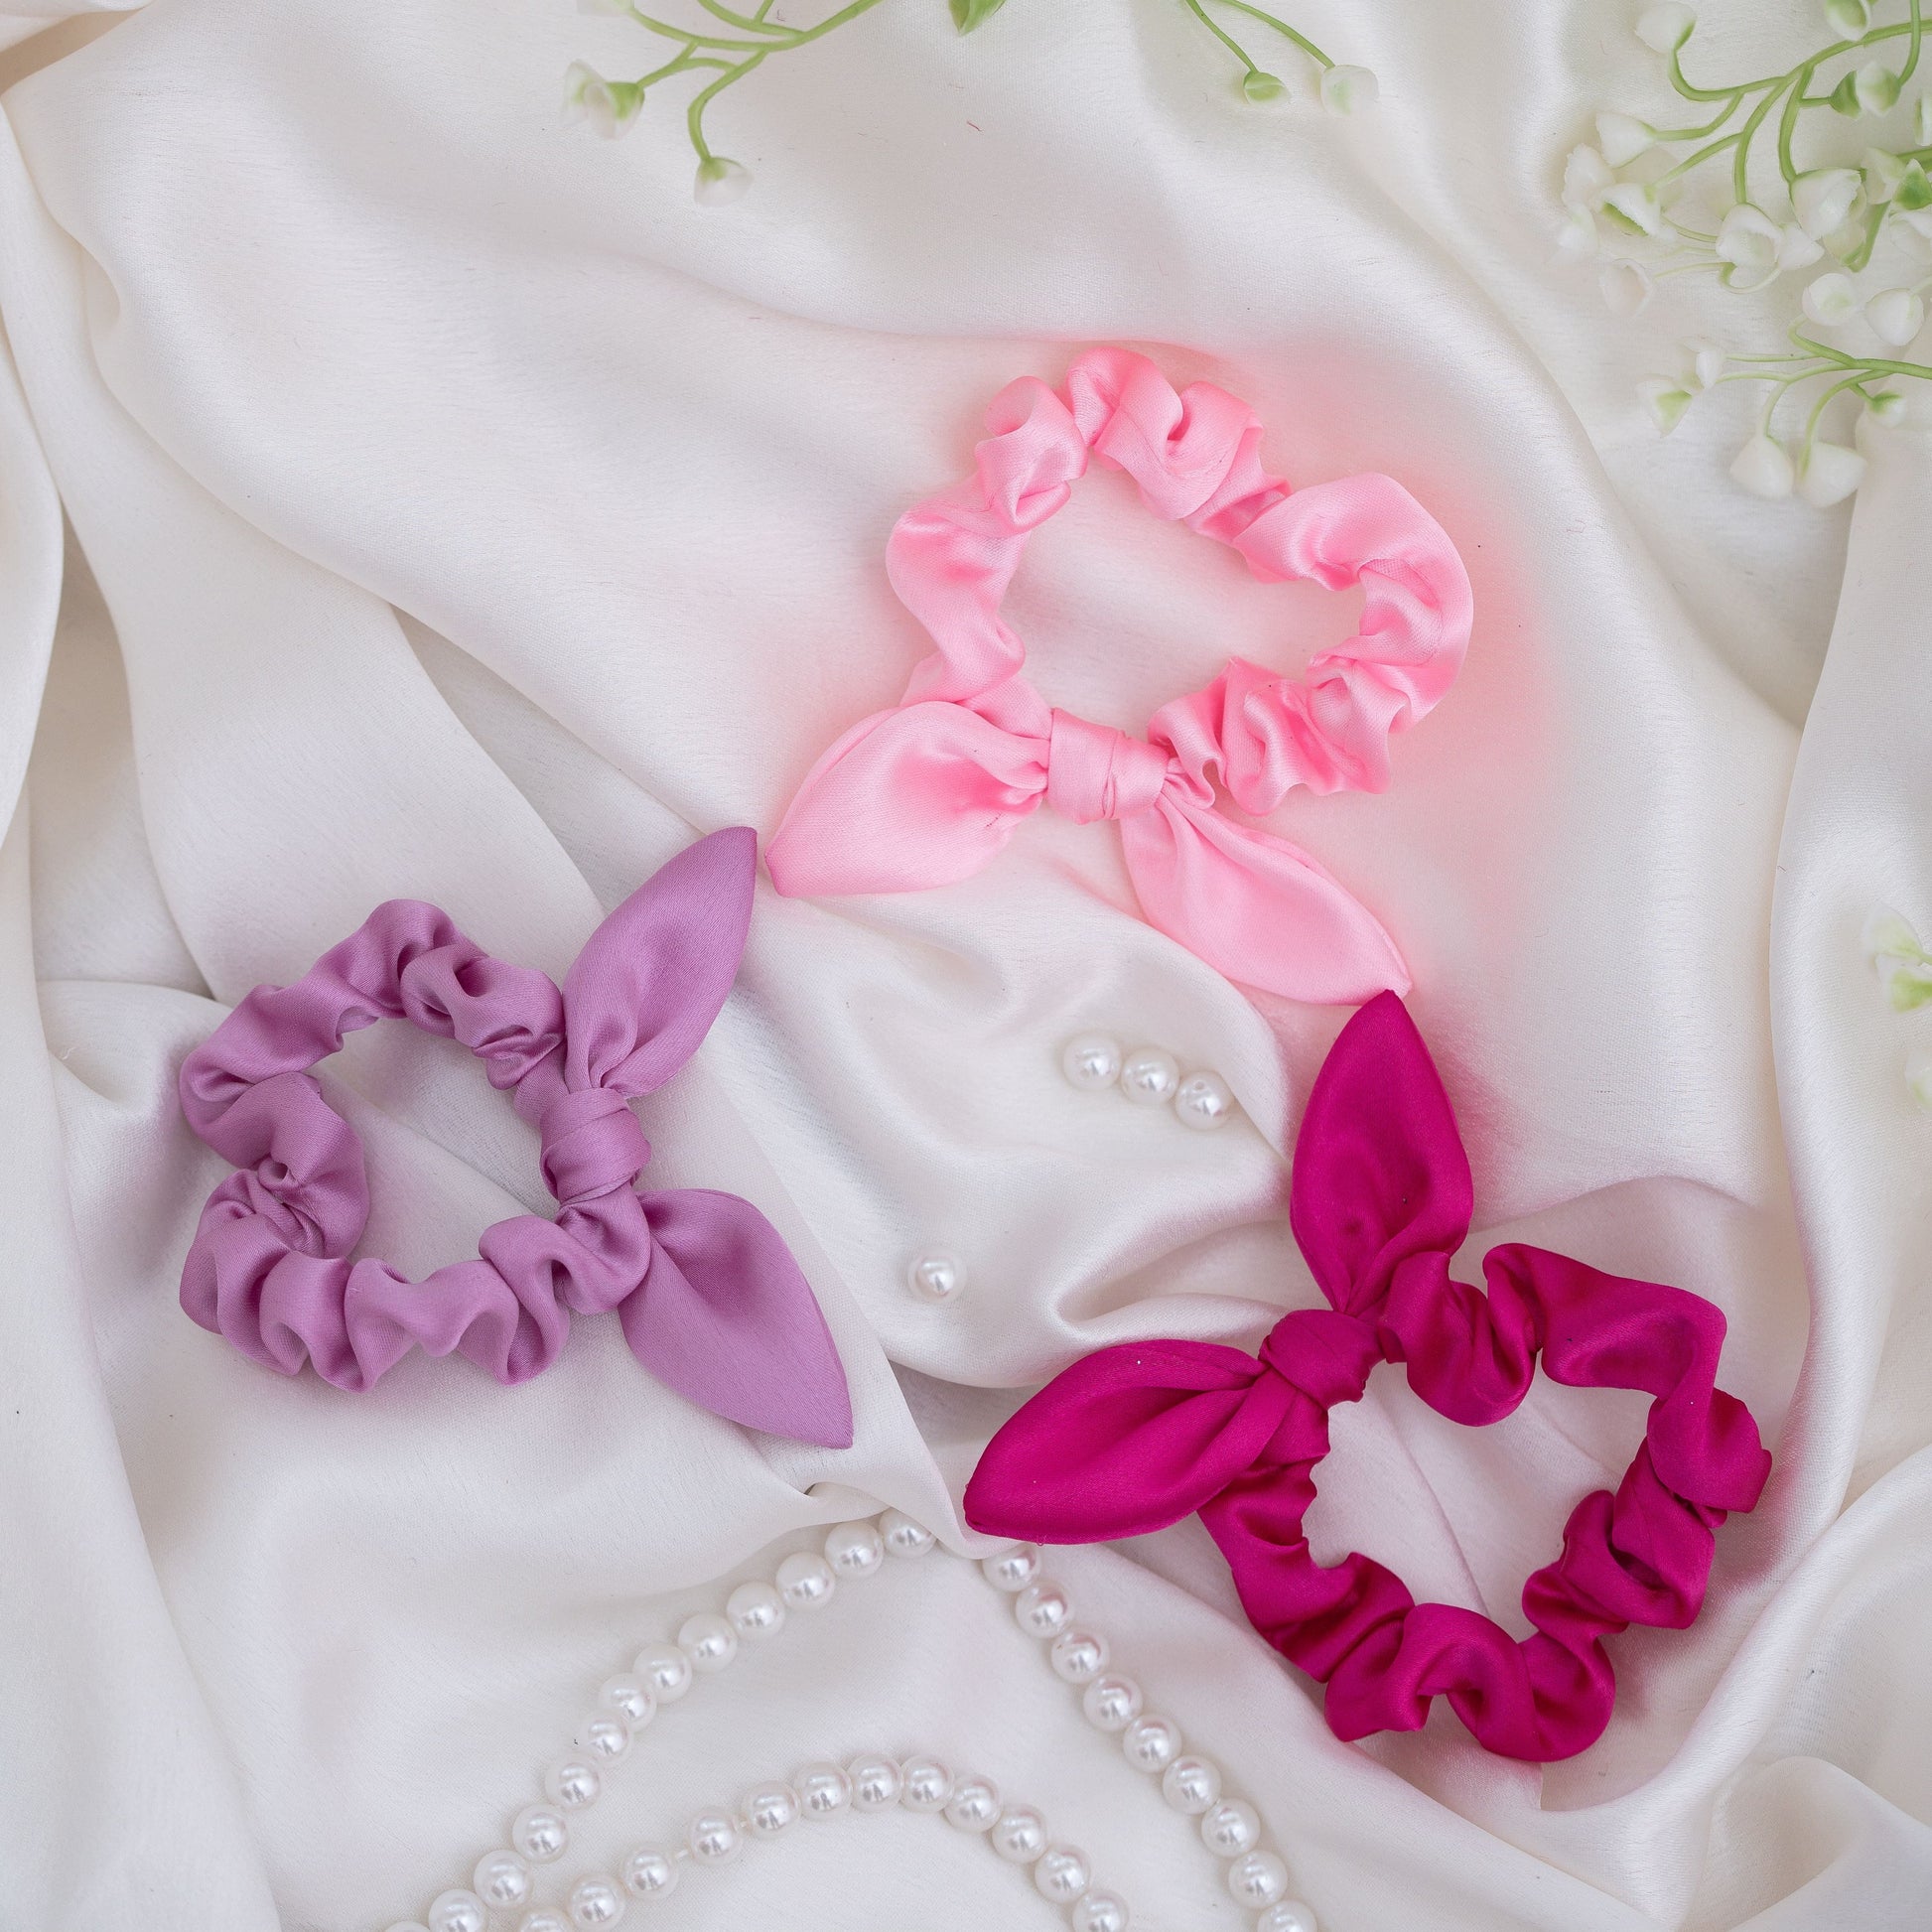 Ribbon Candy- Combo of 3 Scrunchies with tie knot detailed- Light Pink, Hot pink and Lavender